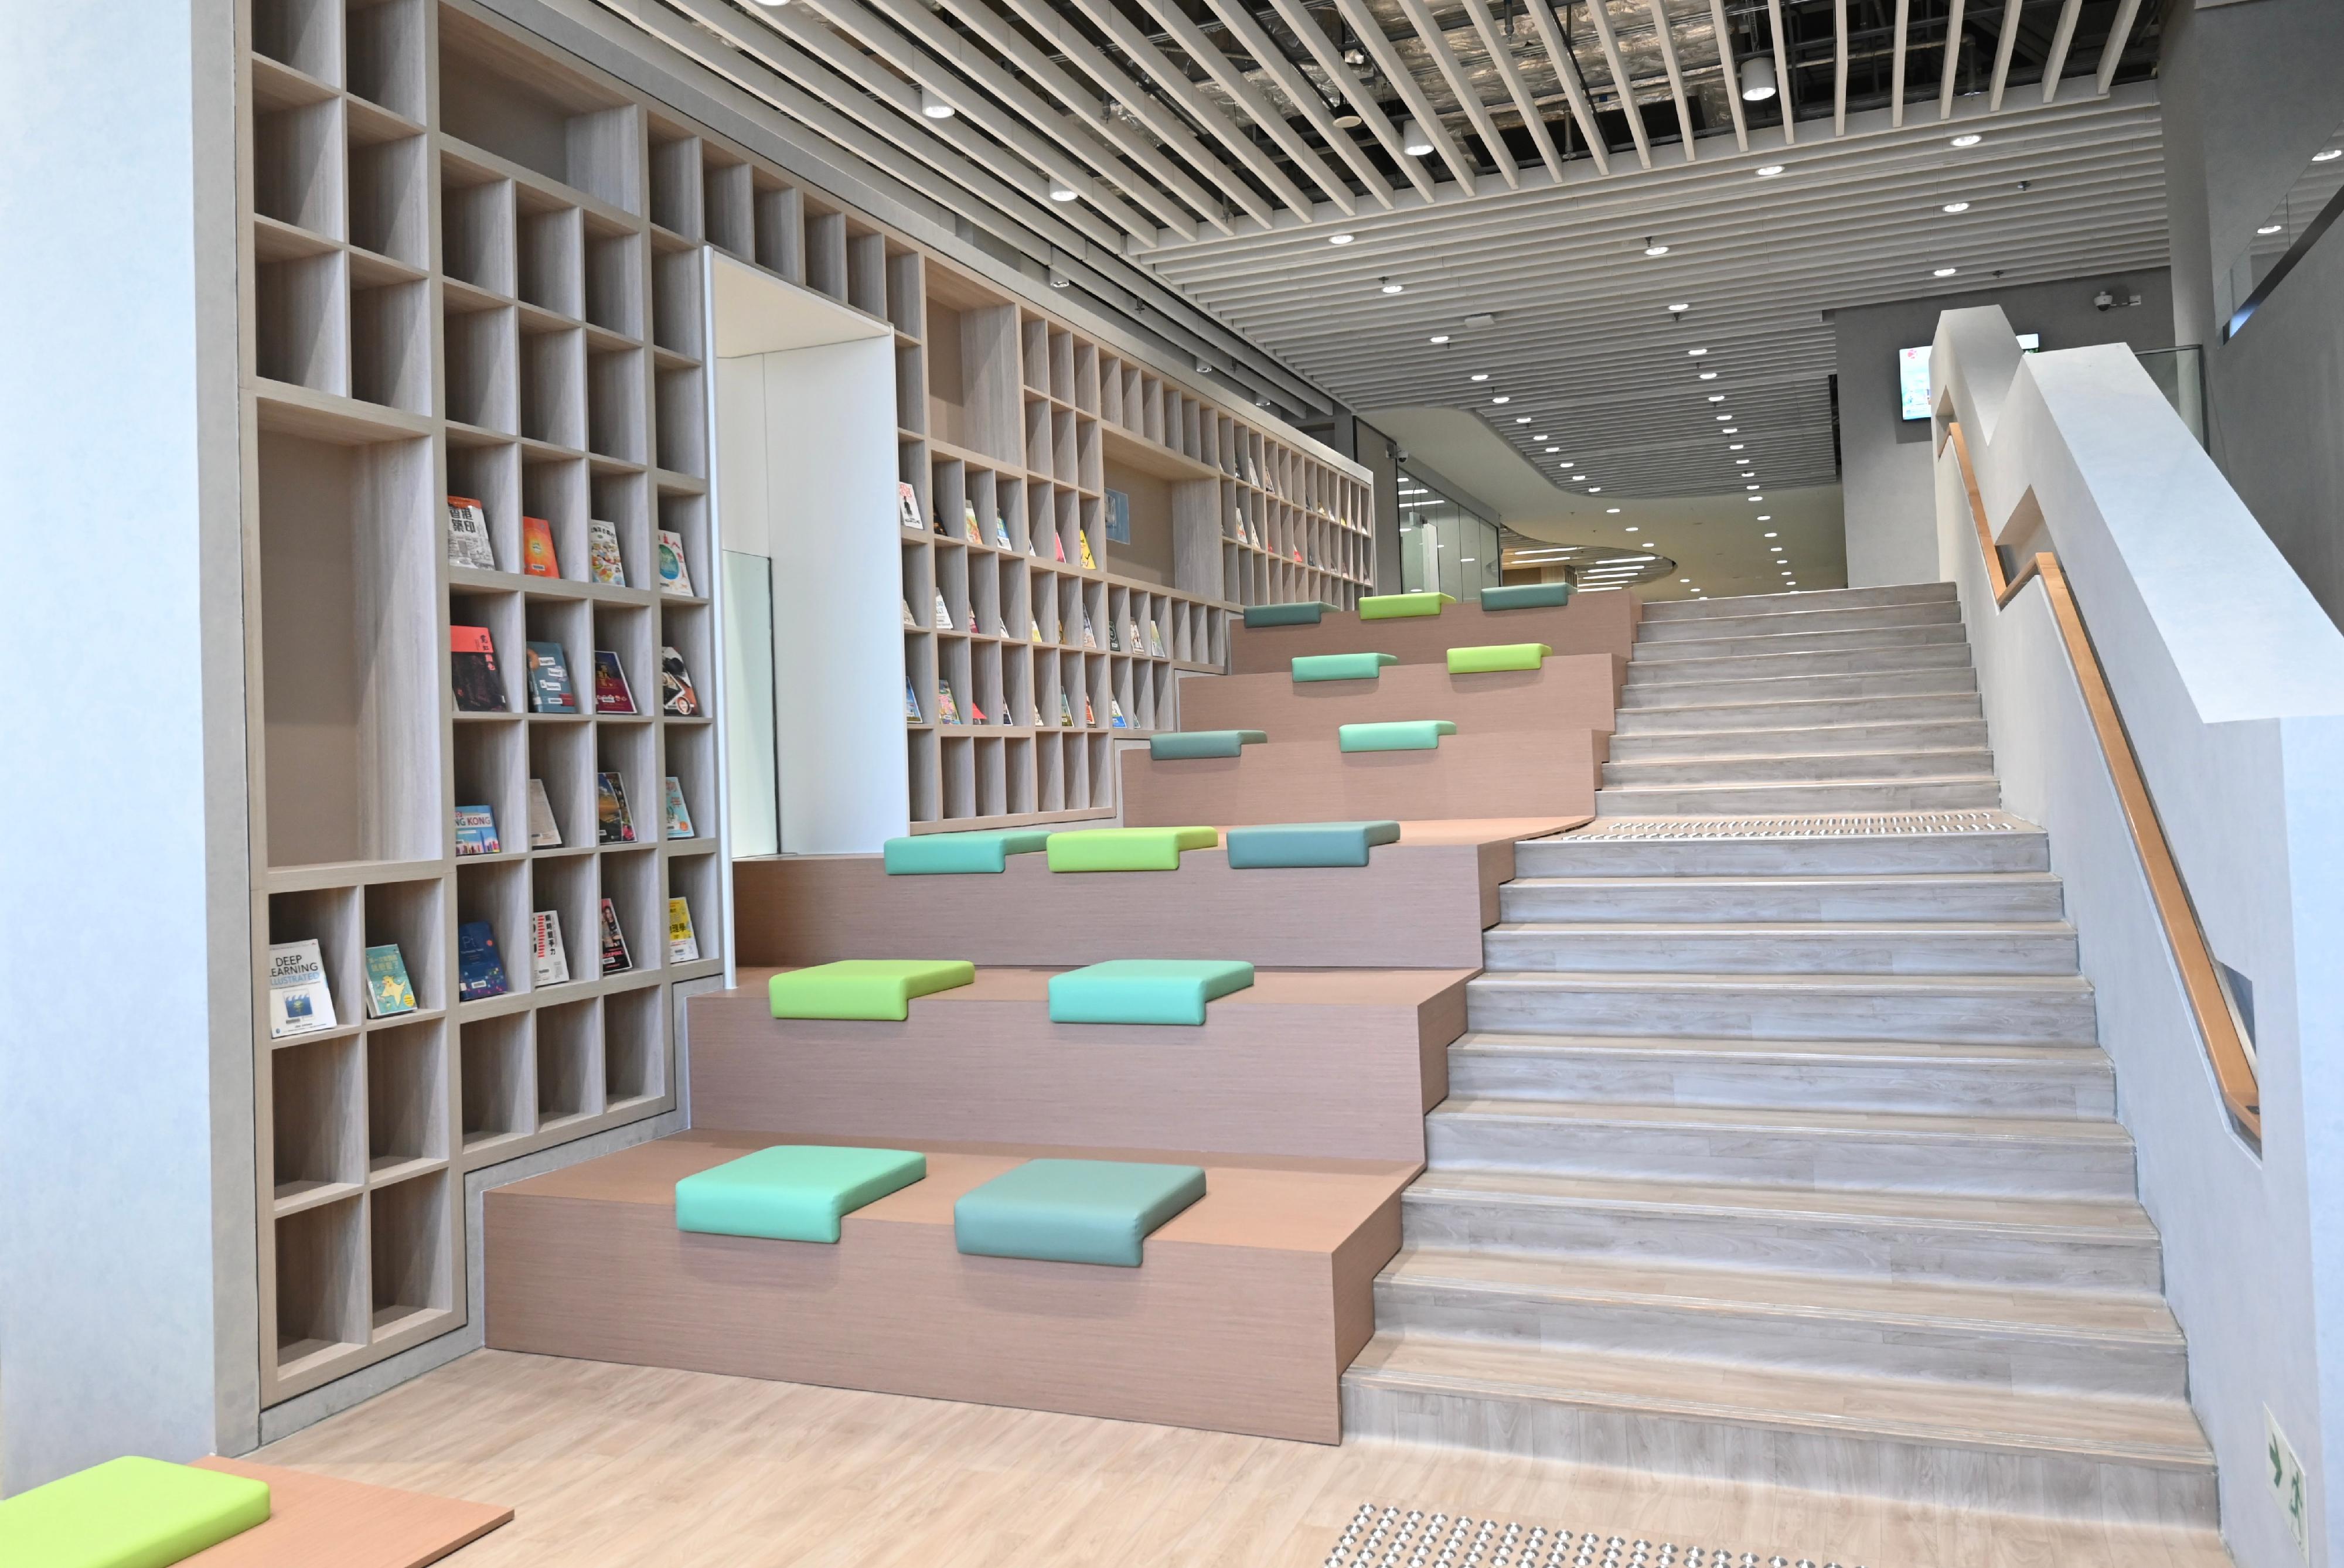 The Sham Shui Po Public Library will come into full operation on March 30 (Thursday), providing residents in the district comprehensive and diverse library services. Members of the public can enjoy the pleasure of reading in a quiet and relaxing environment.